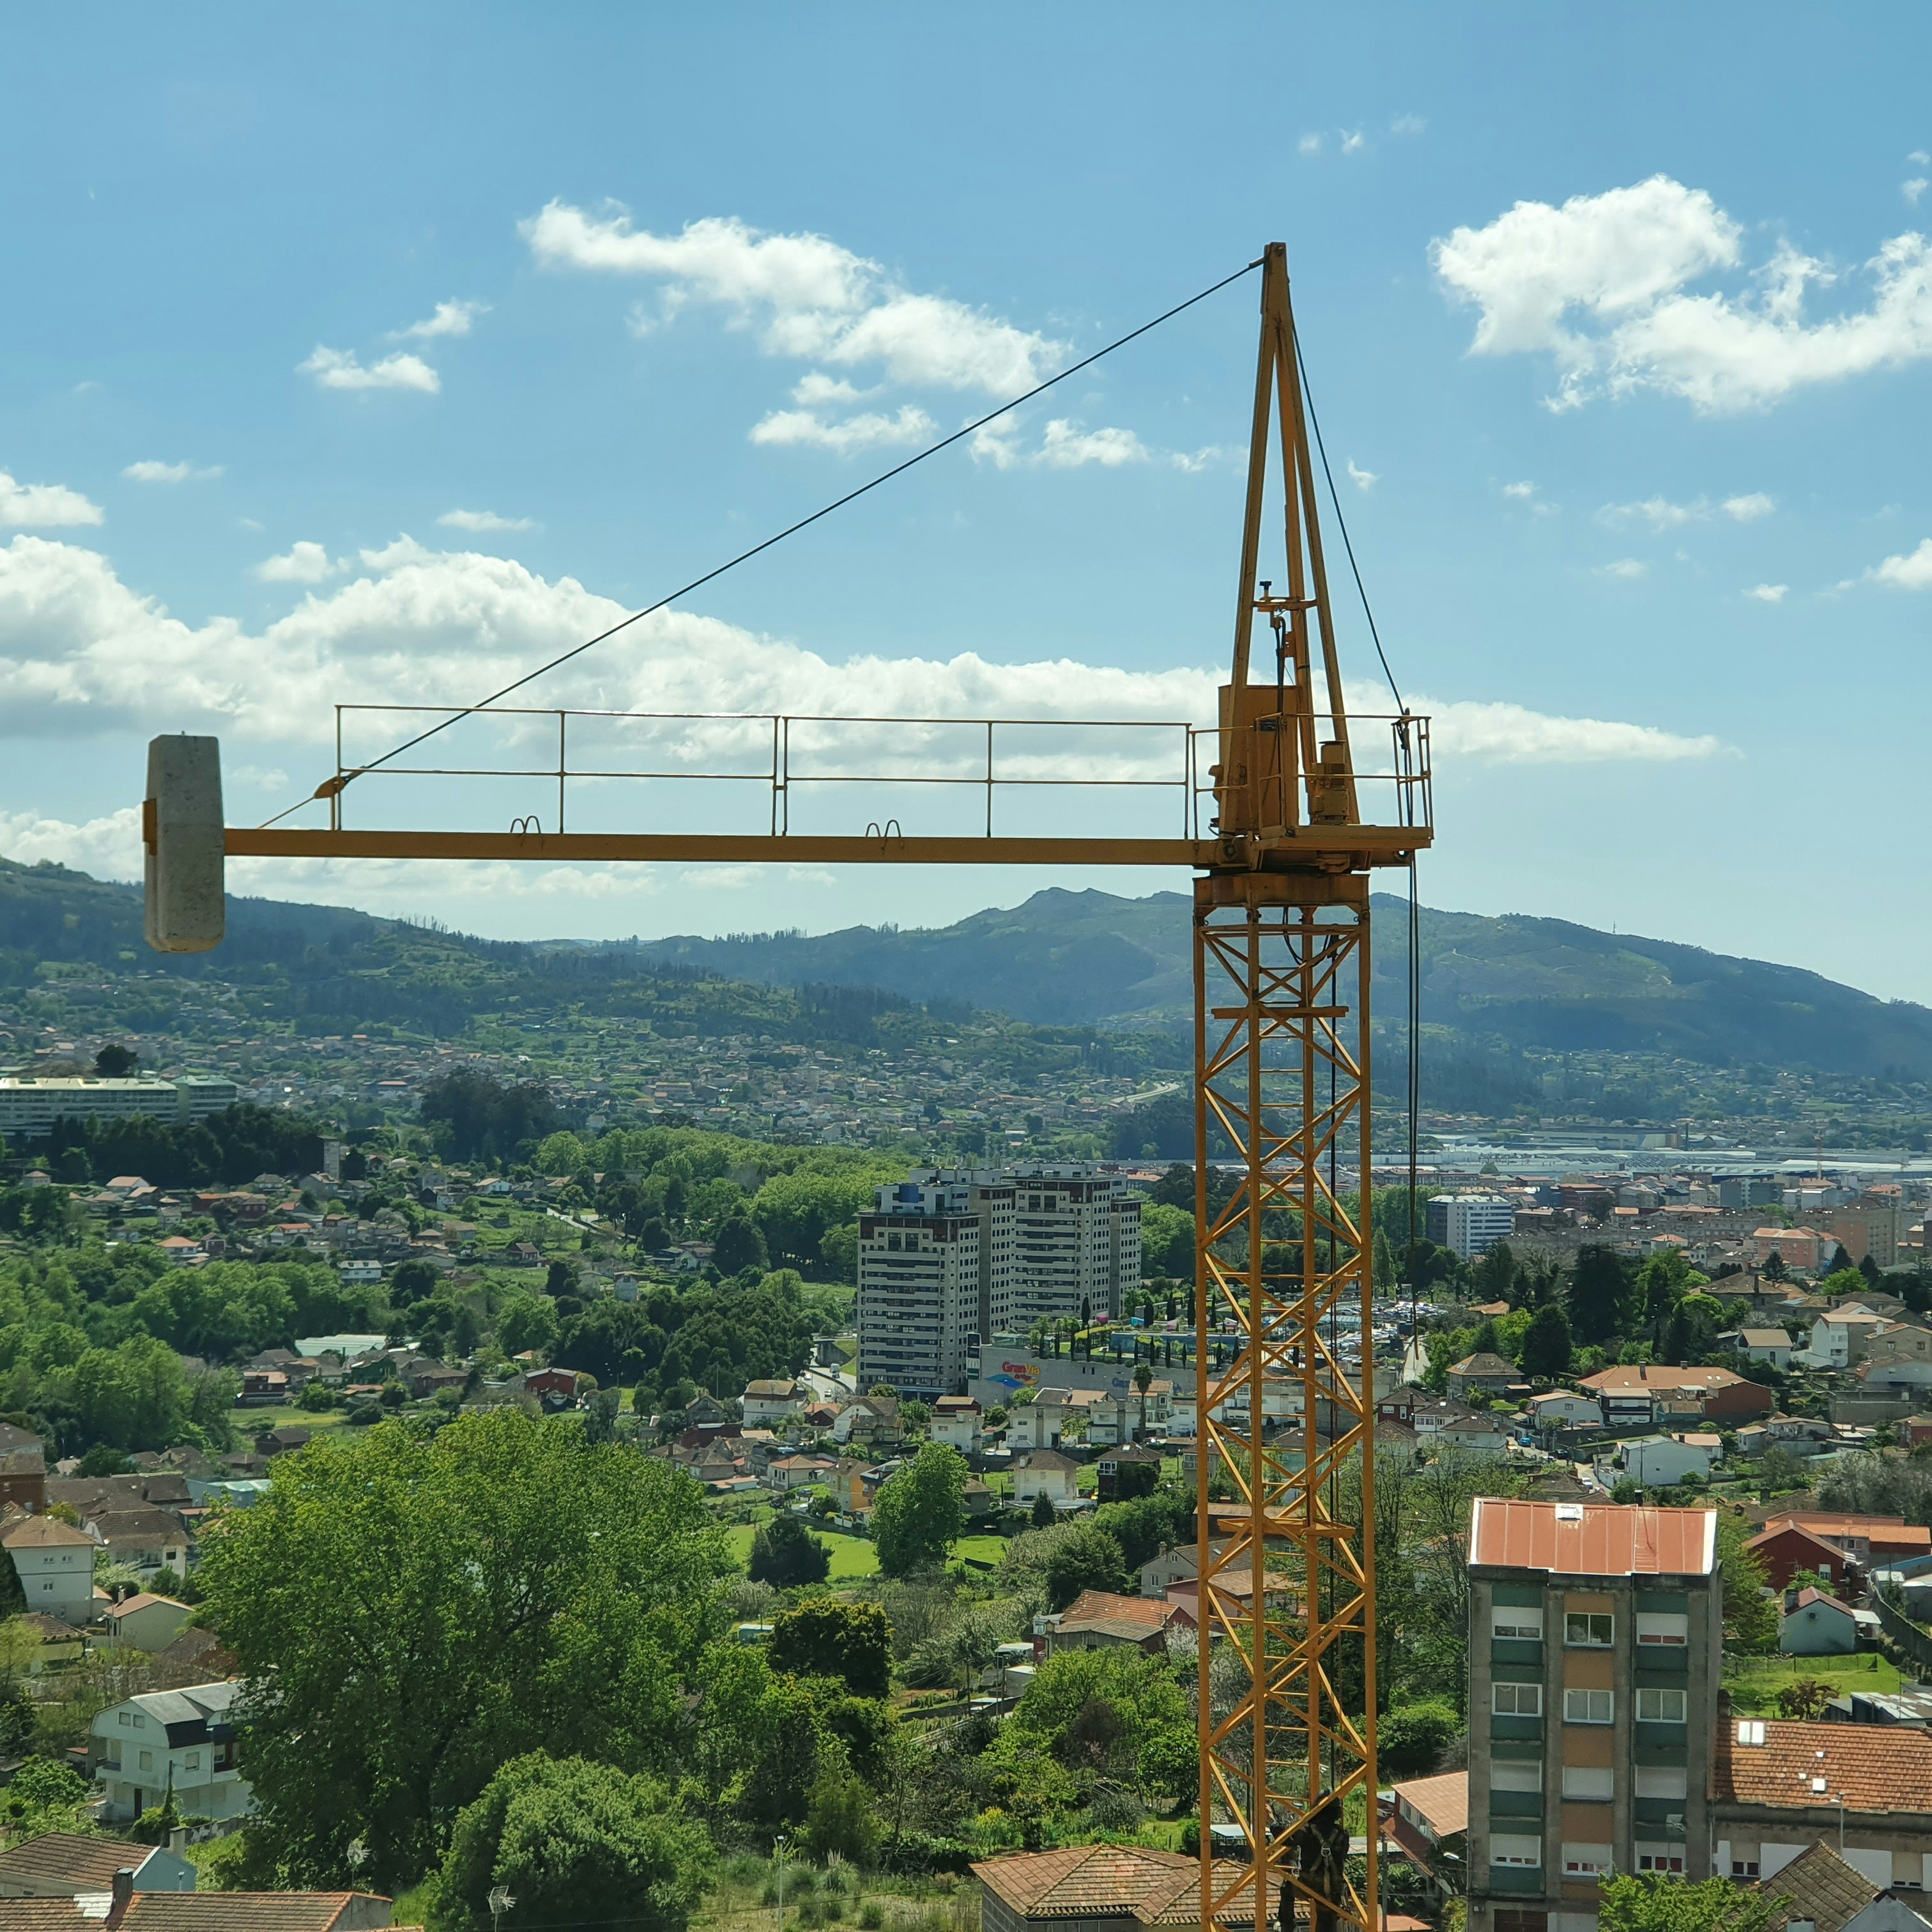 A crane during assembly with a nice mixed nature & city landscape in the background